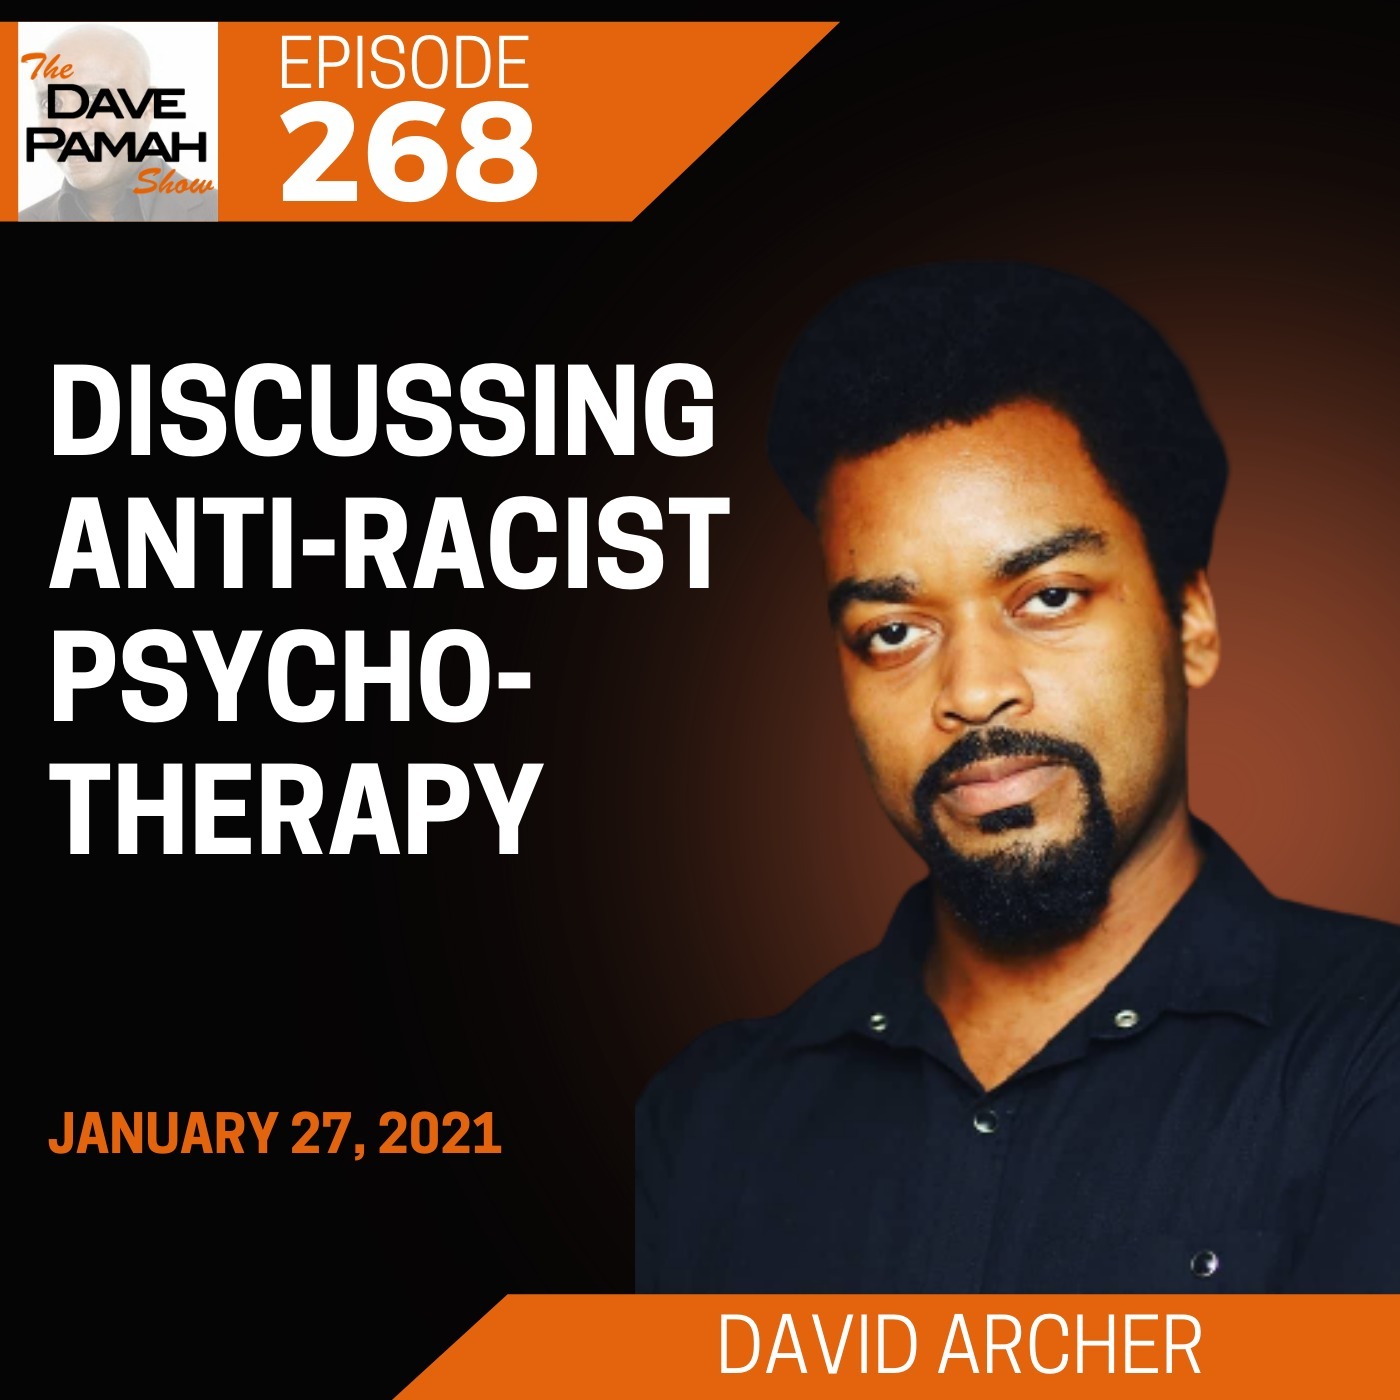 Discussing Anti-Racist Psychotherapy with David Archer Image